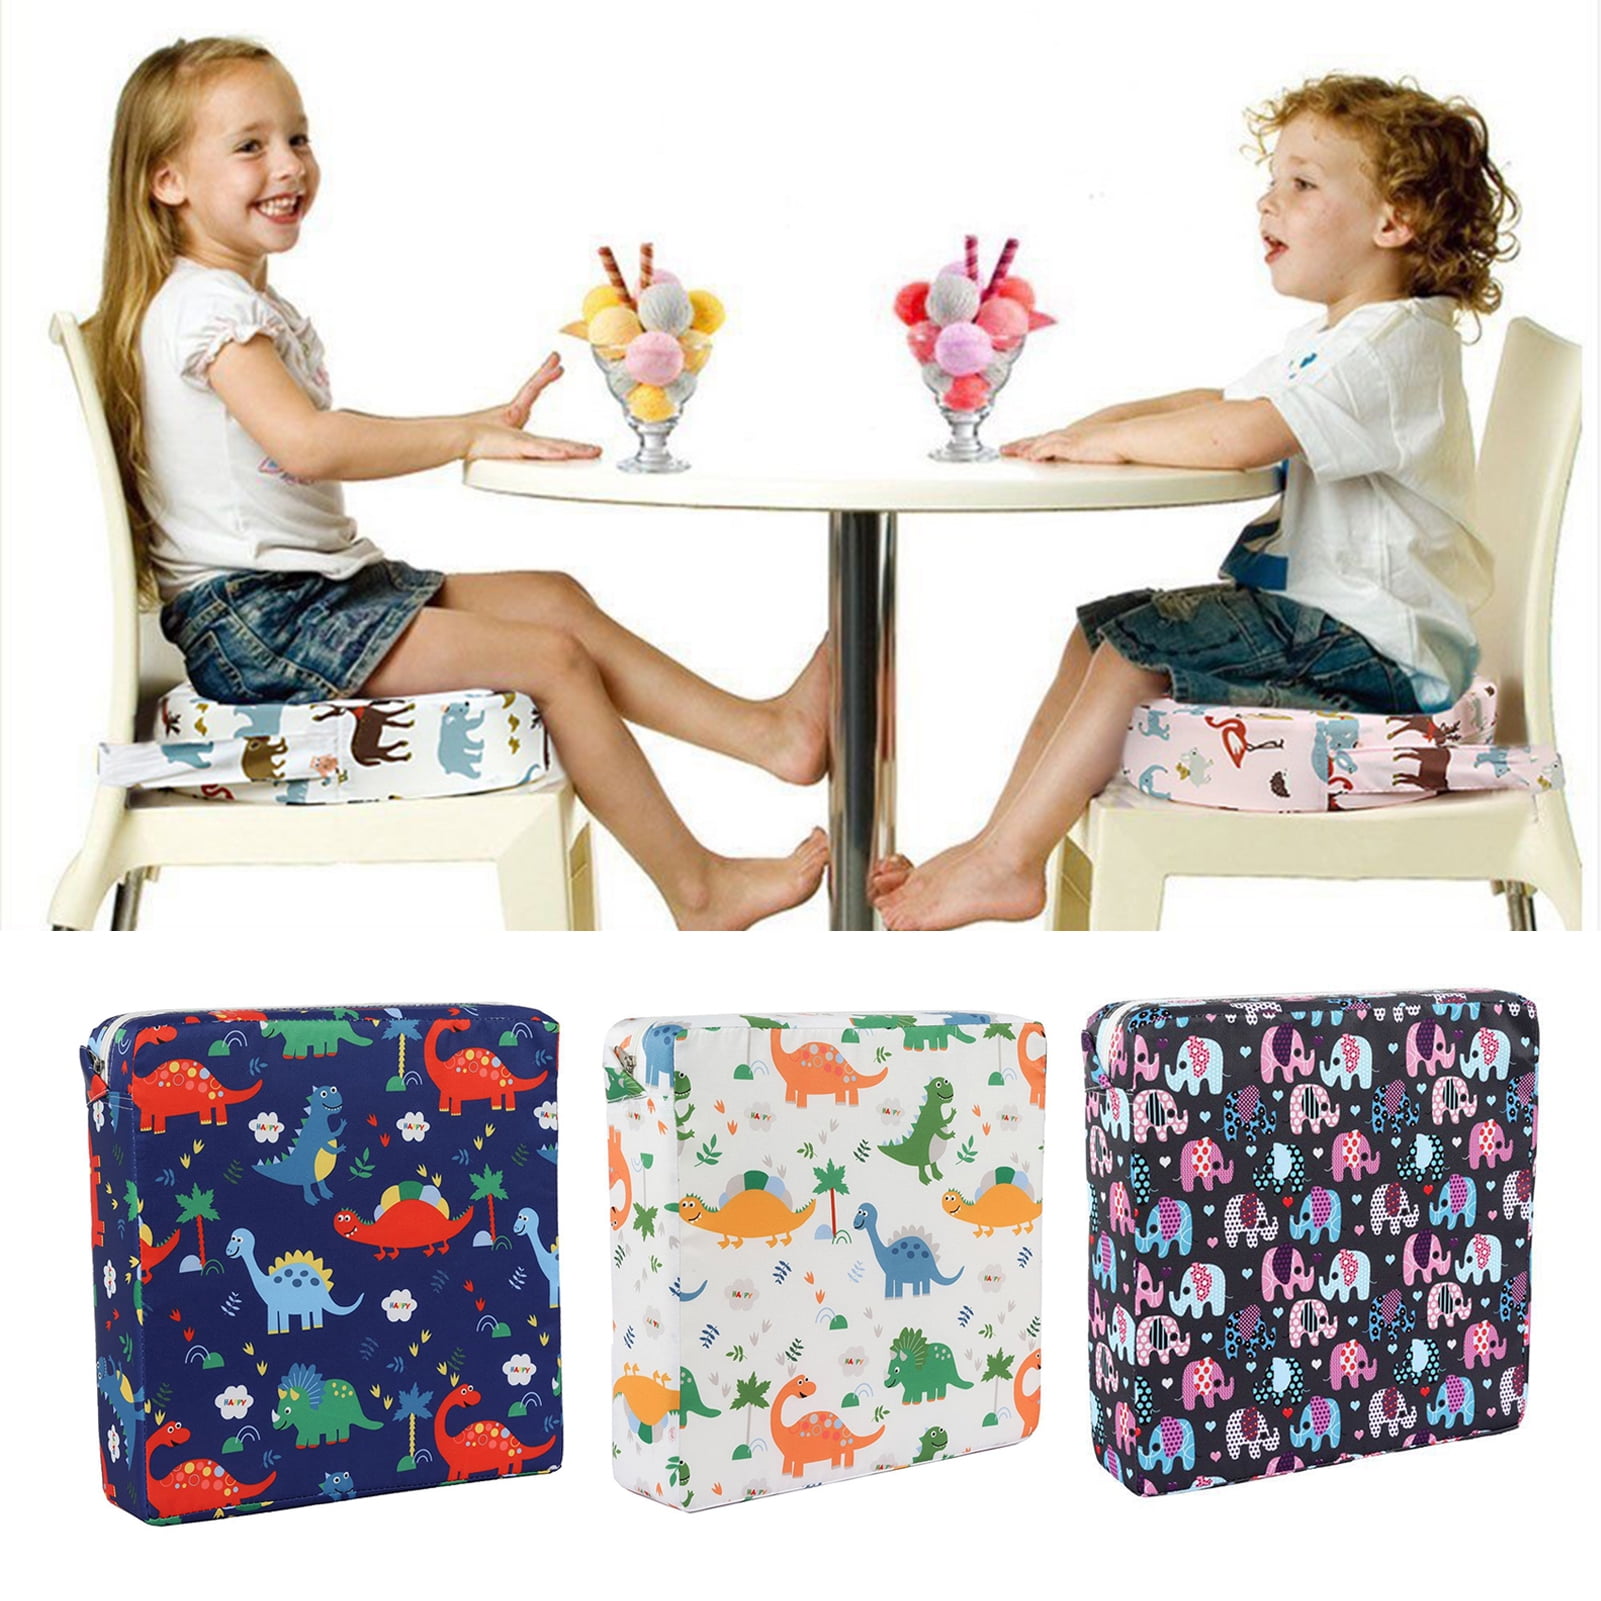 Washable and Portable Increasing Baby Thick Pad for Travel Blue Toddler Booster Seat for Dining Table 4Straps Kids Chair Cushion for Dining 